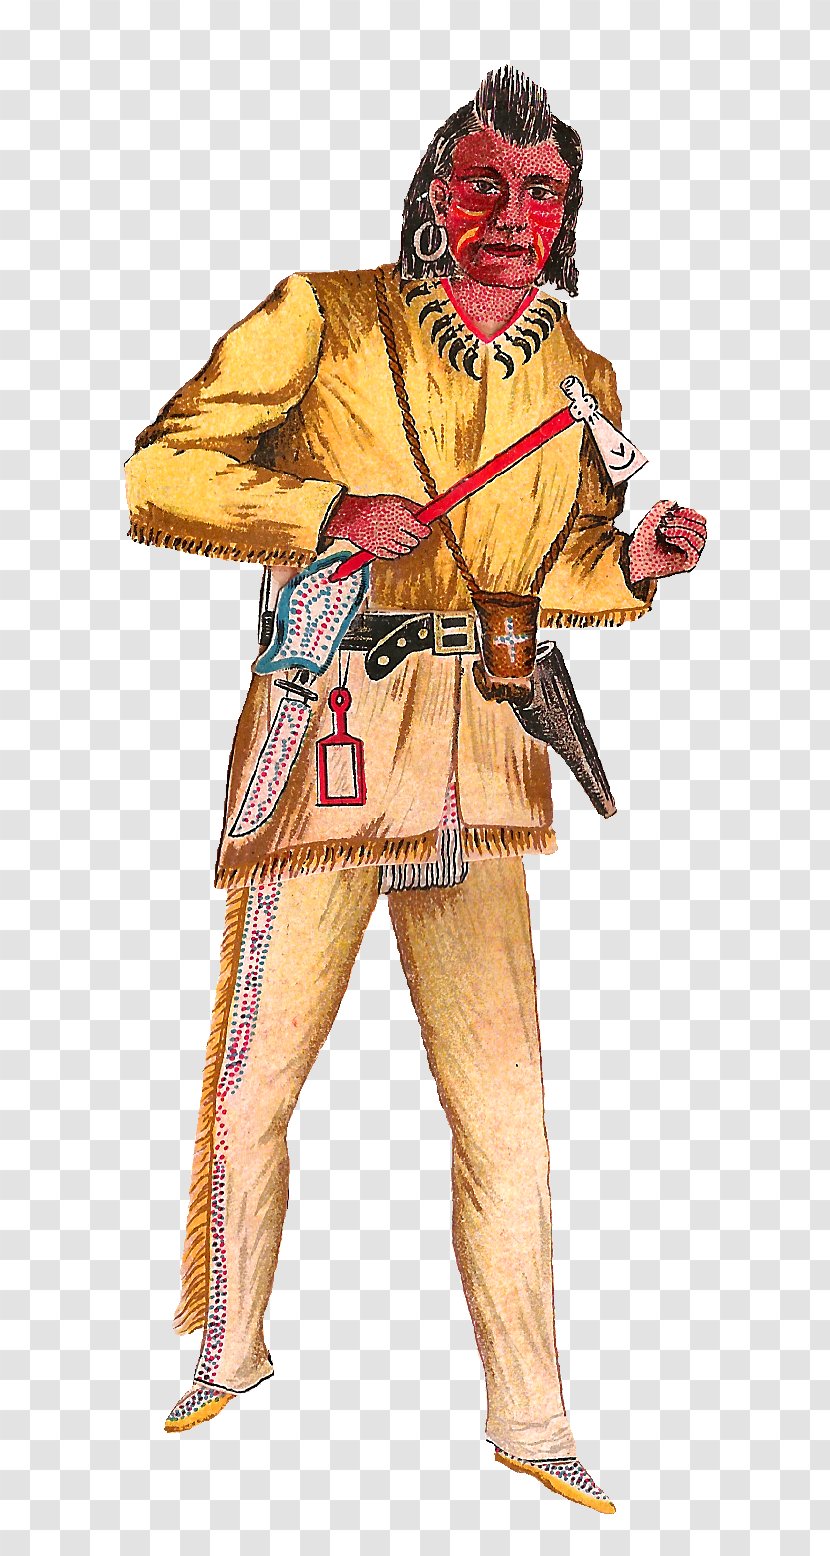 American Frontier Native Americans In The United States Cowboy Clip Art - Gunfighter - Wild West Transparent PNG